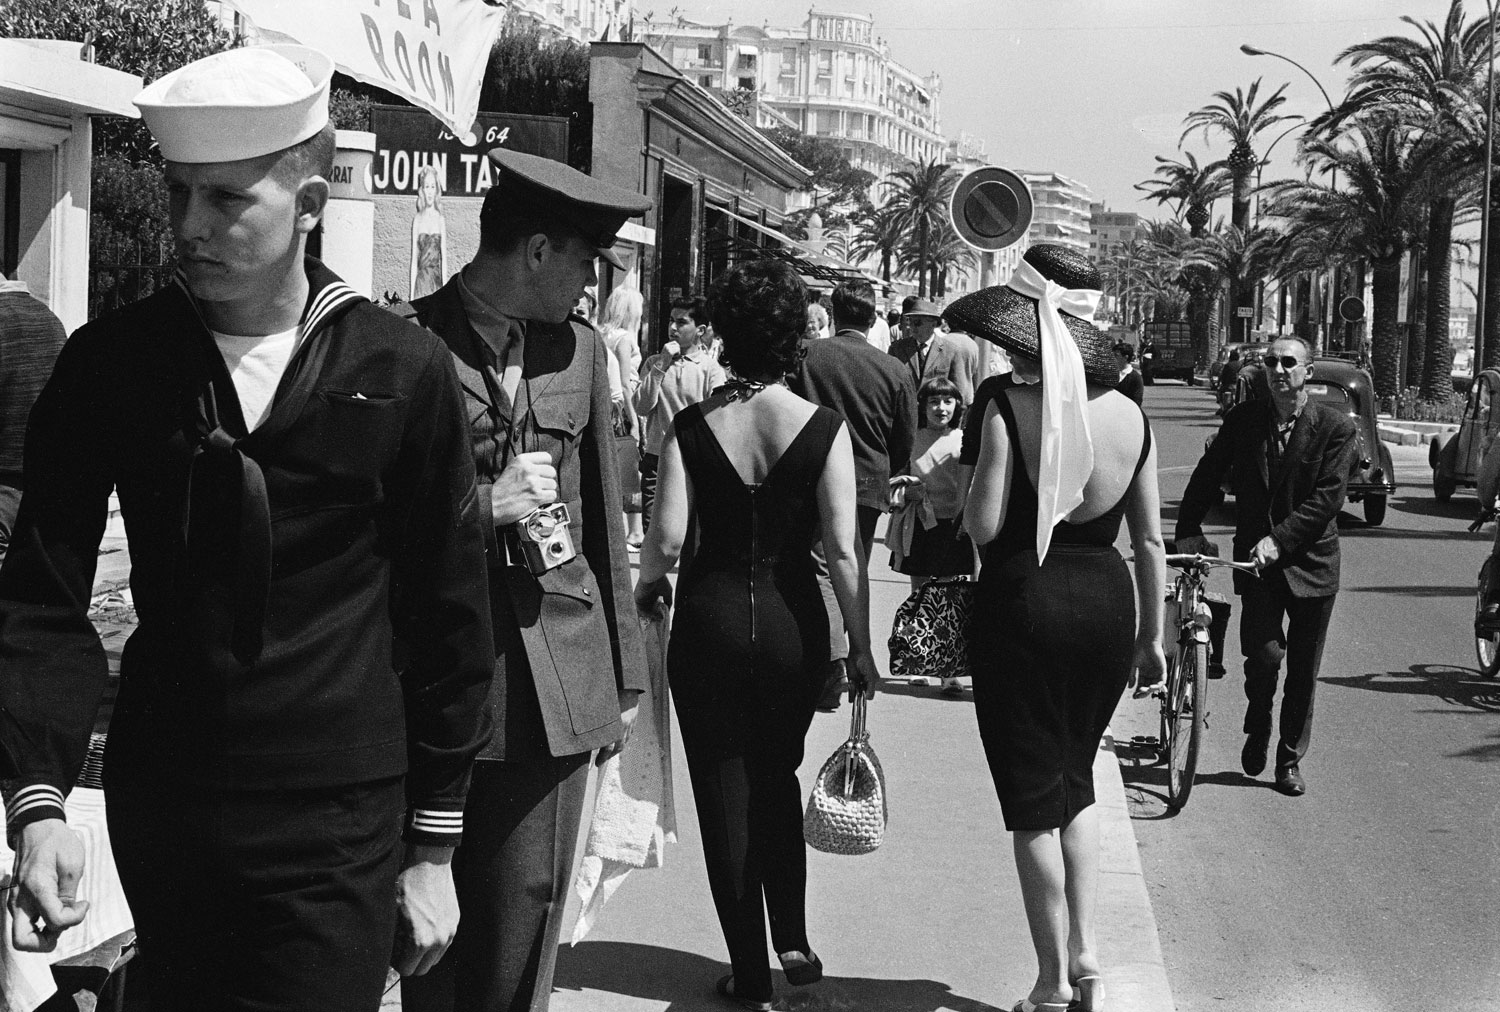 An American serviceman admires passersby in Cannes, 1962.